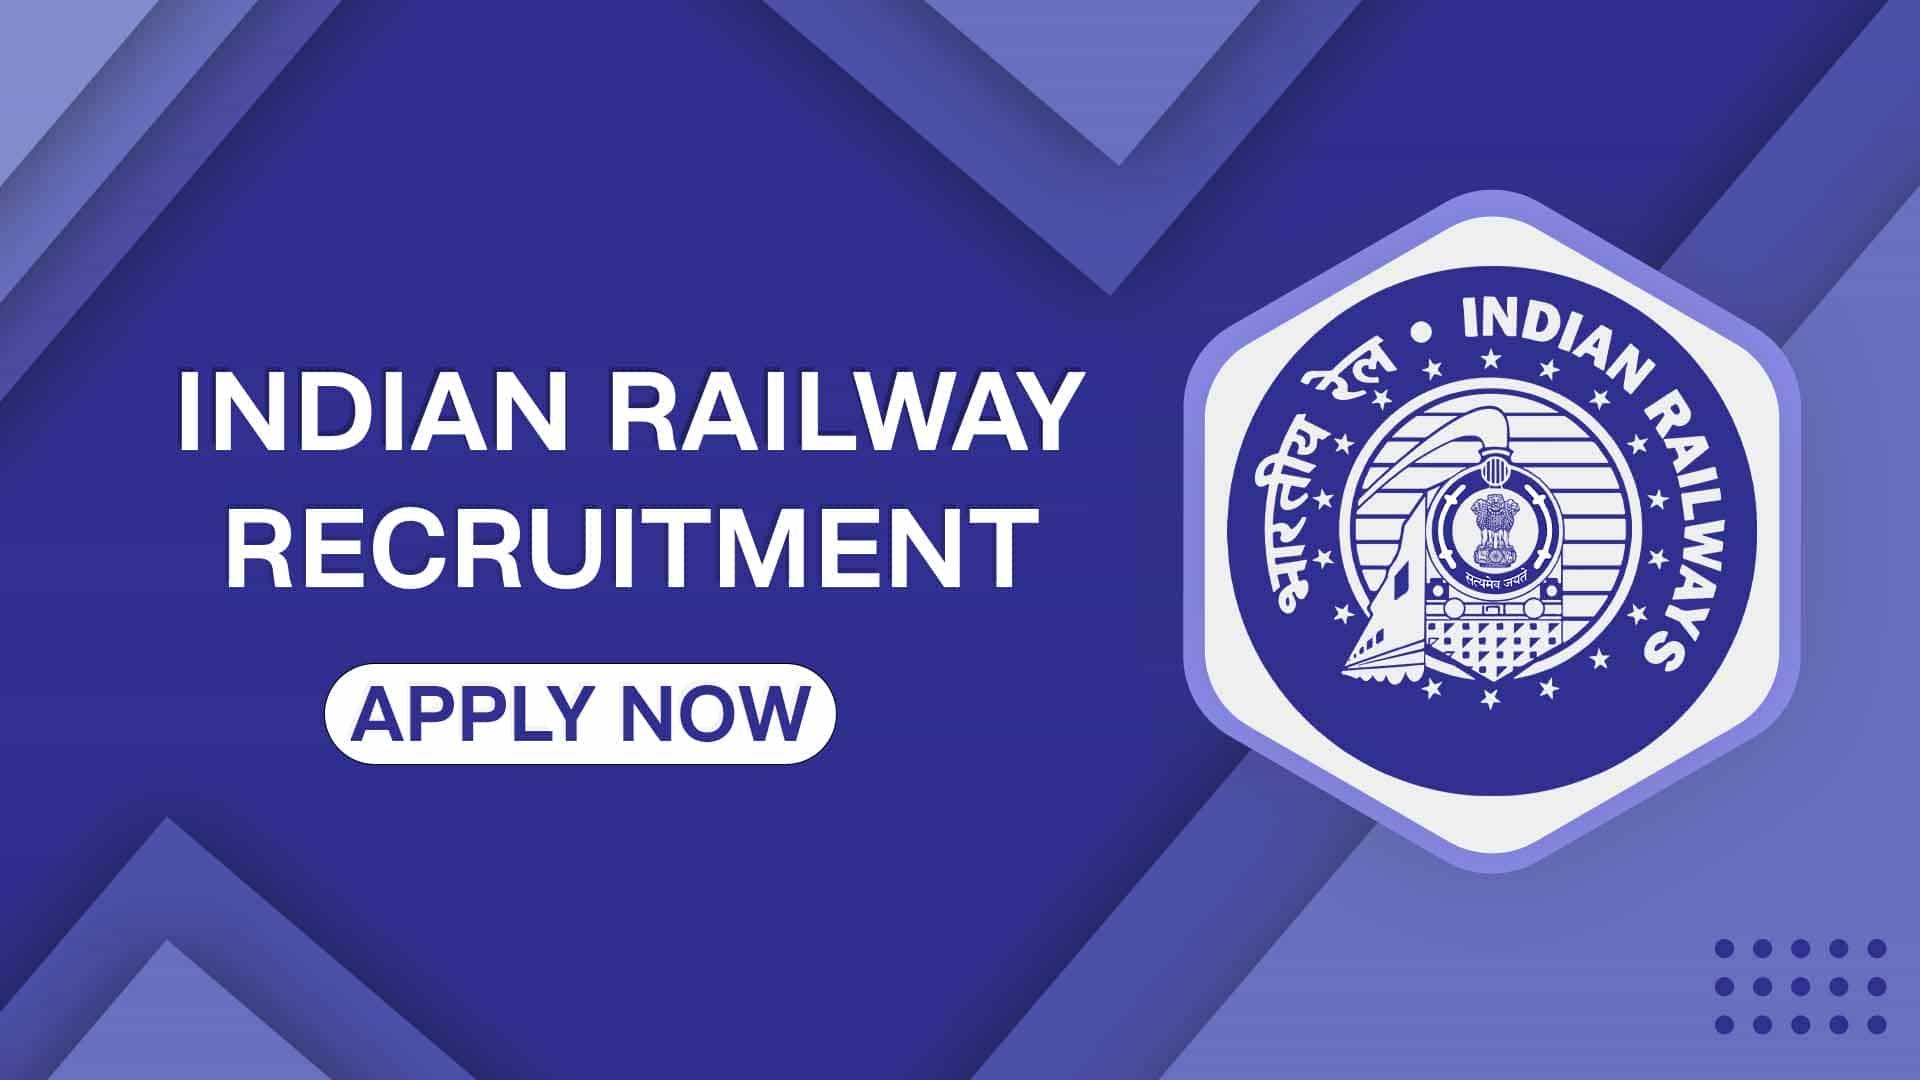 Indian Railways Recruitment 2022: Monthly Salary up to 340000, Check Post, Qualification and How to Apply